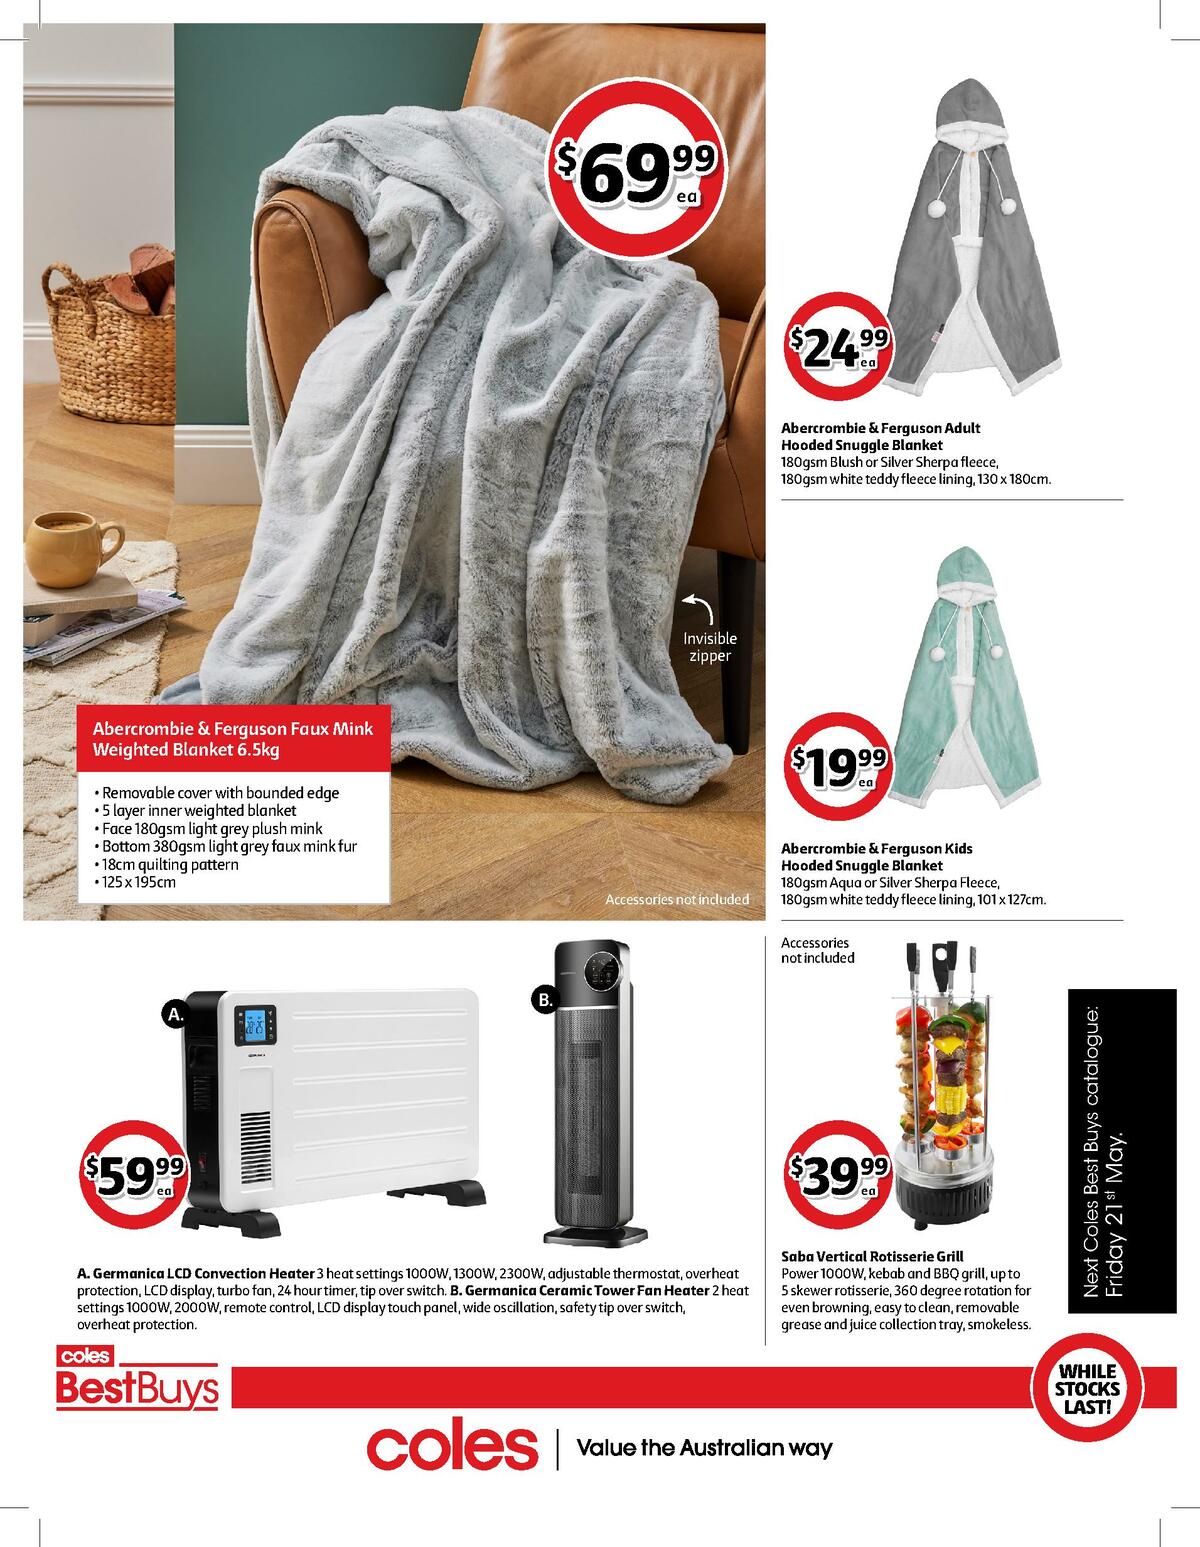 Coles Best Buys - Winter Warmers Catalogues from 7 May